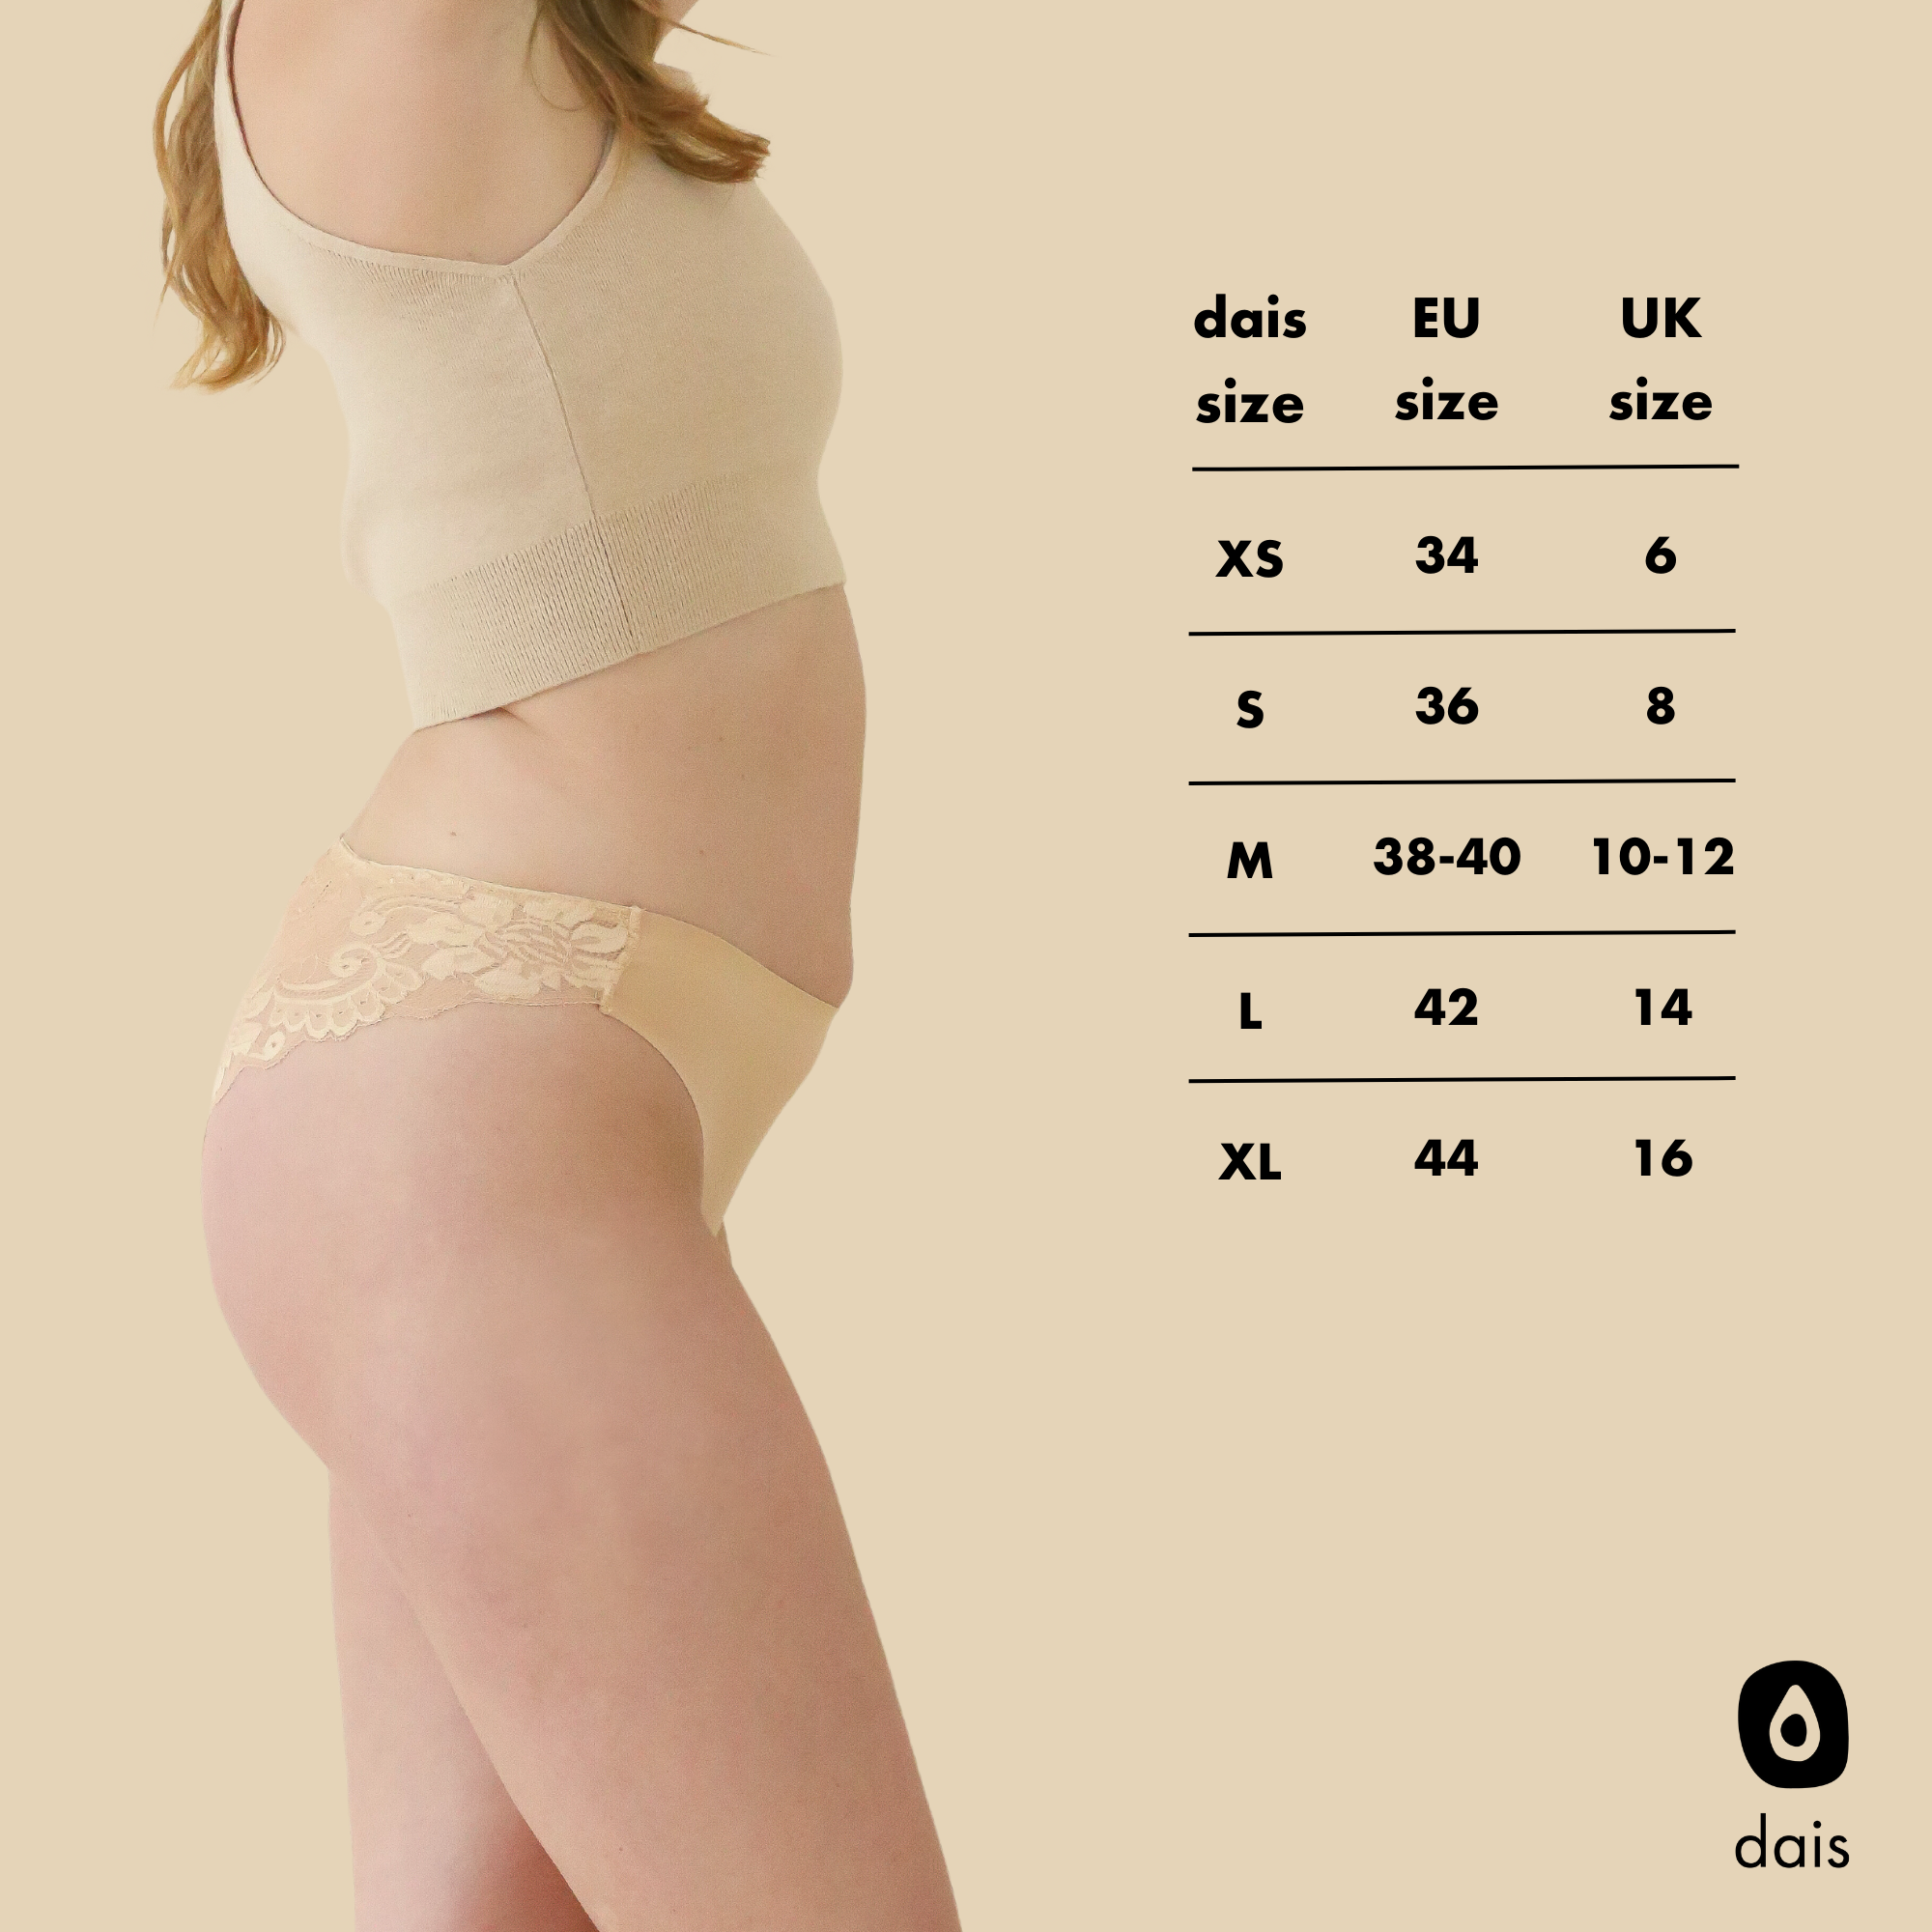 Size chart for dais daily underwear in brazilian cut with lace in beige. Sizing options of XS, S, M, L and XL and EU and UK size conversions.